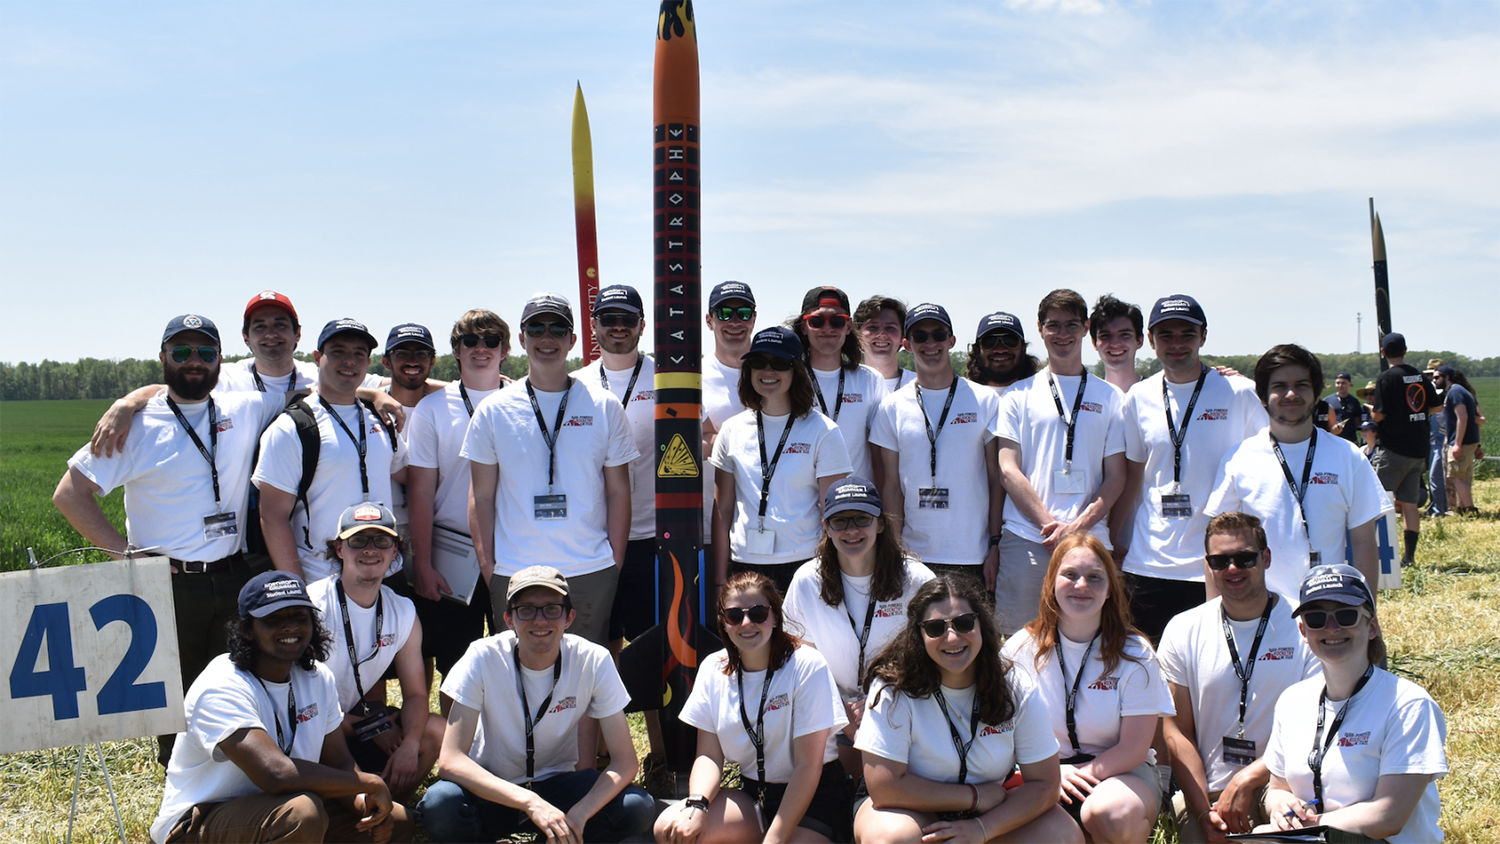 The 2021-2022 MAE rocketry team poses for a group photo with their model rockets.